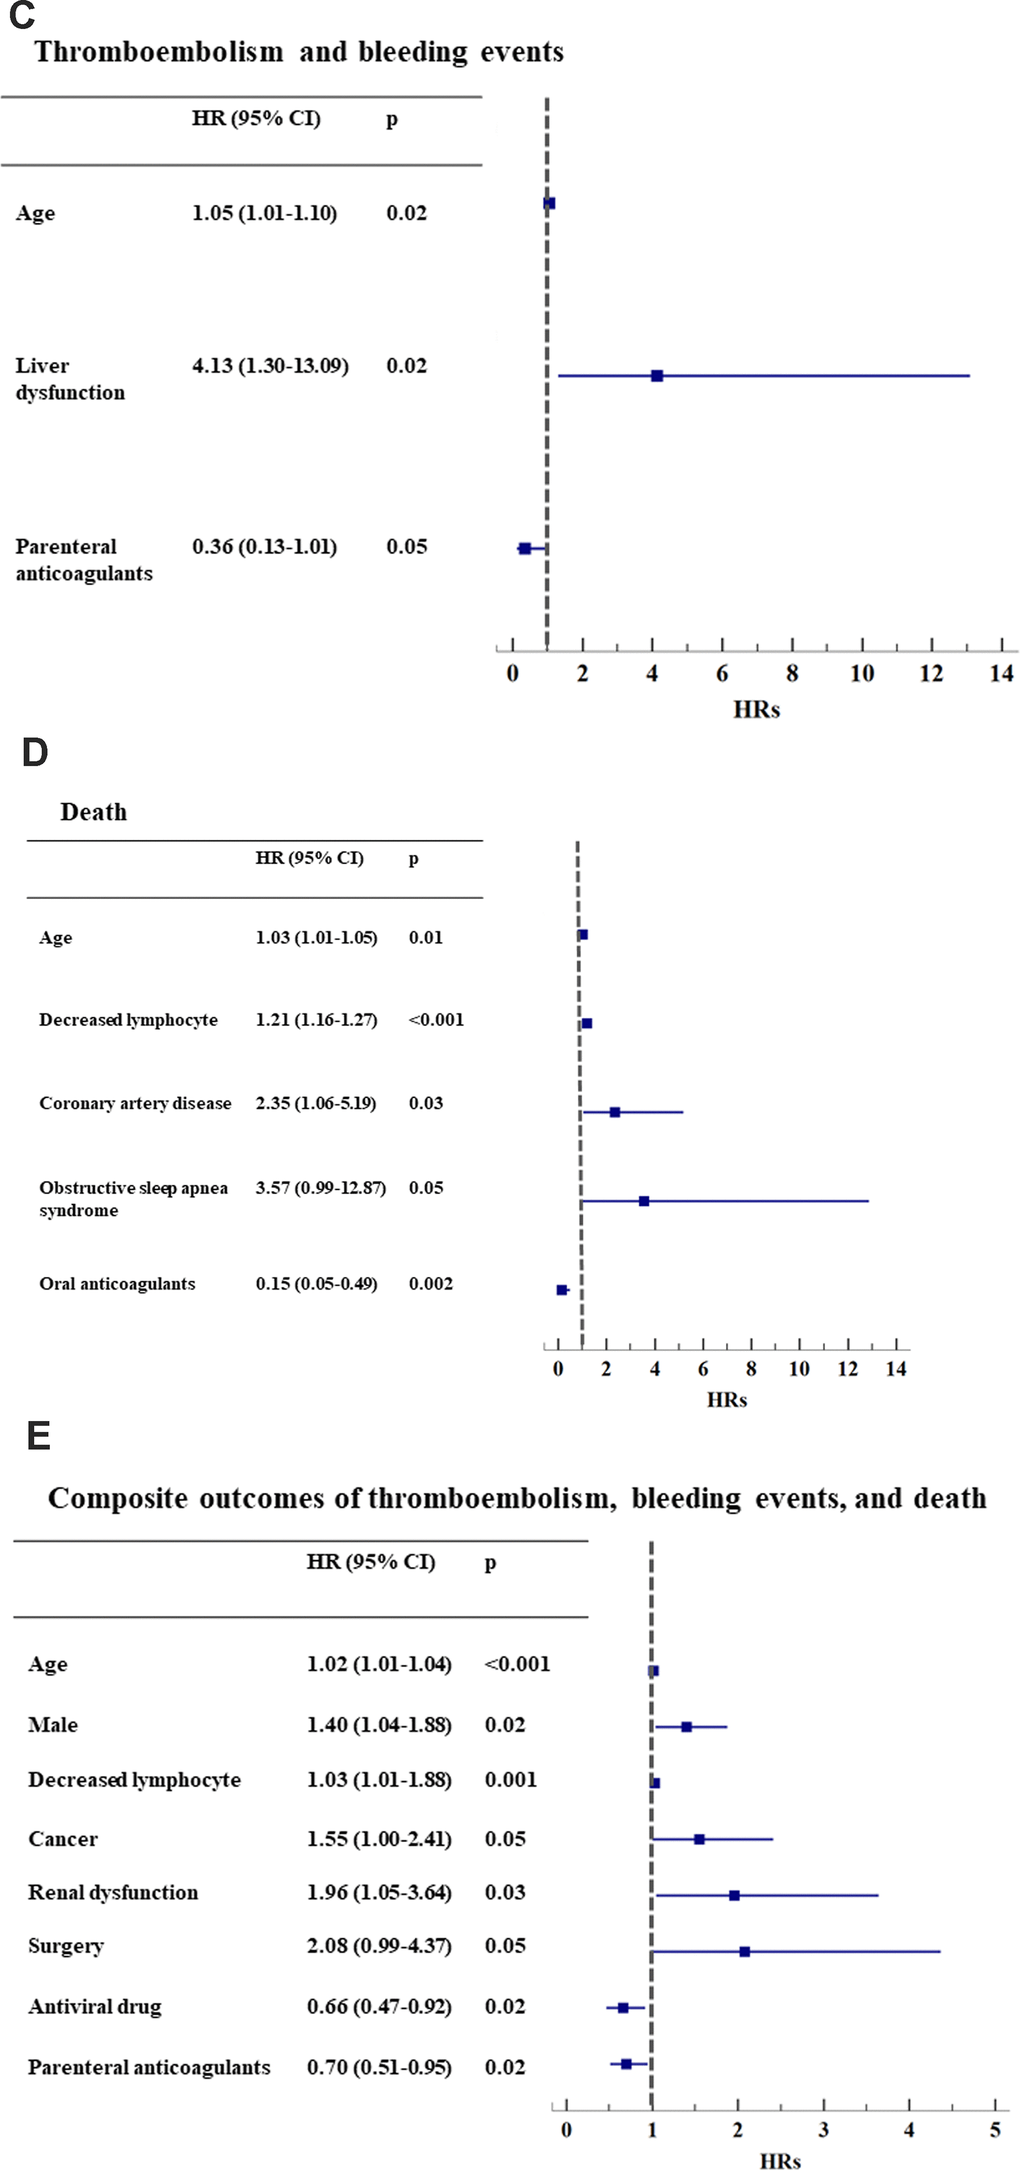 Hazard ratios of clinical events, adjusting for baseline risk factors. (C) Thromboembolism and bleeding events (n=25); (D) Death (n=91); (E) Composite outcomes of thromboembolism, bleeding events, and death (n=235). *HR: hazard ratio. CI: confidential interval.